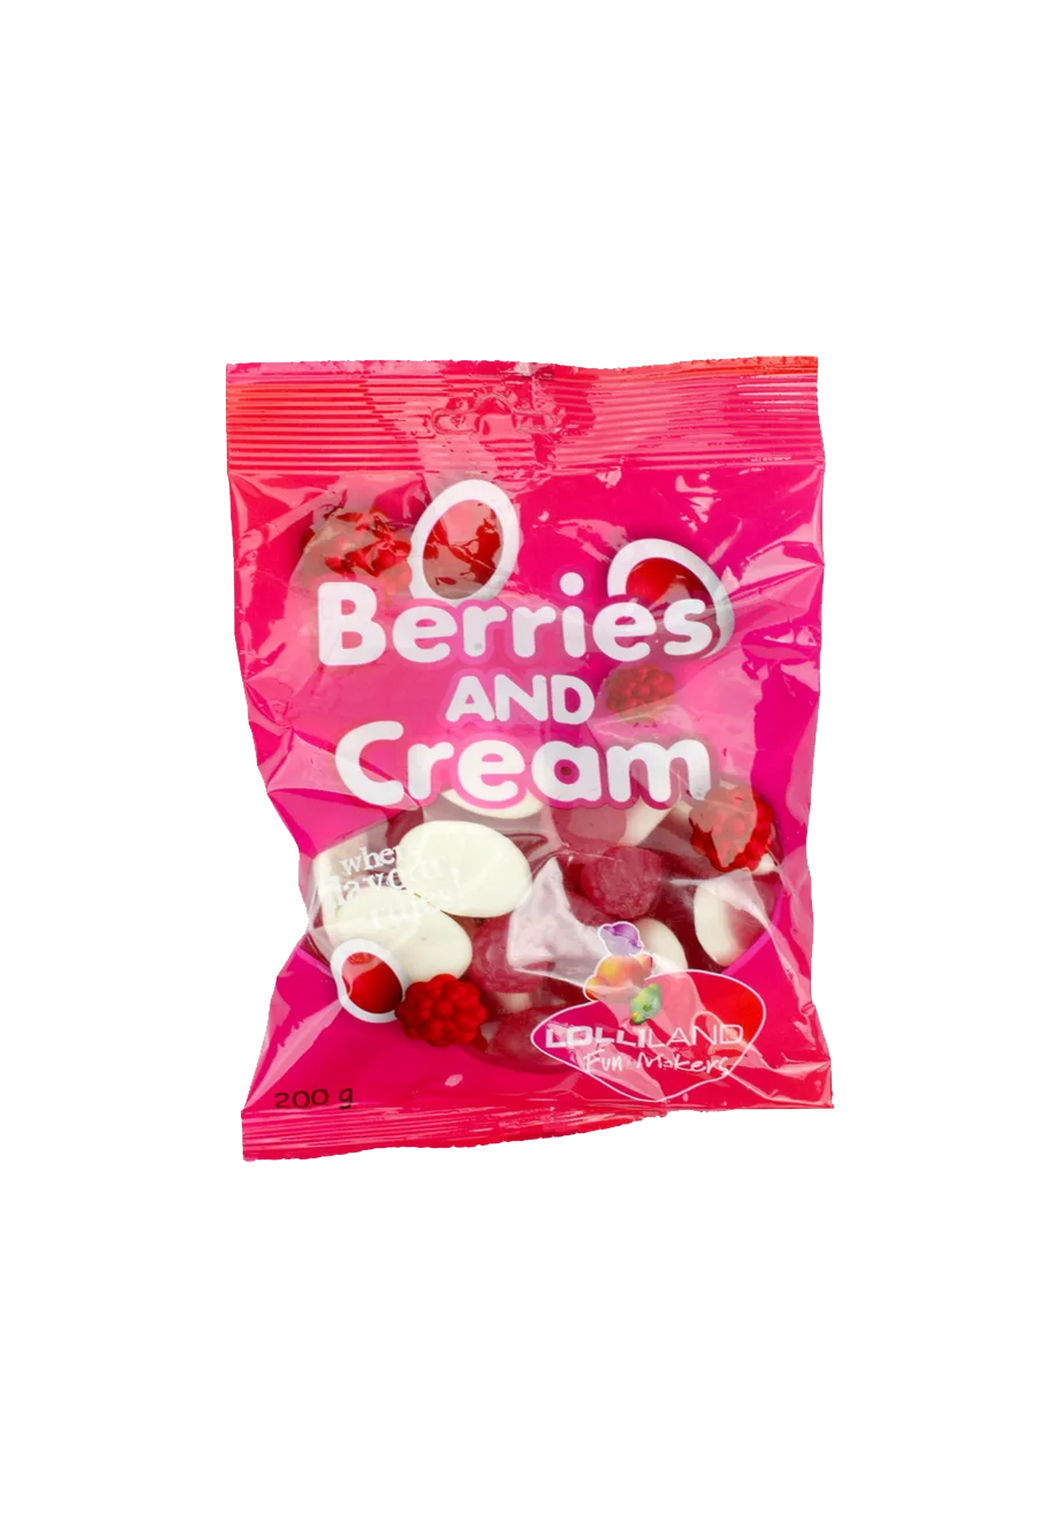 Lolliland Berries and Cream 200g